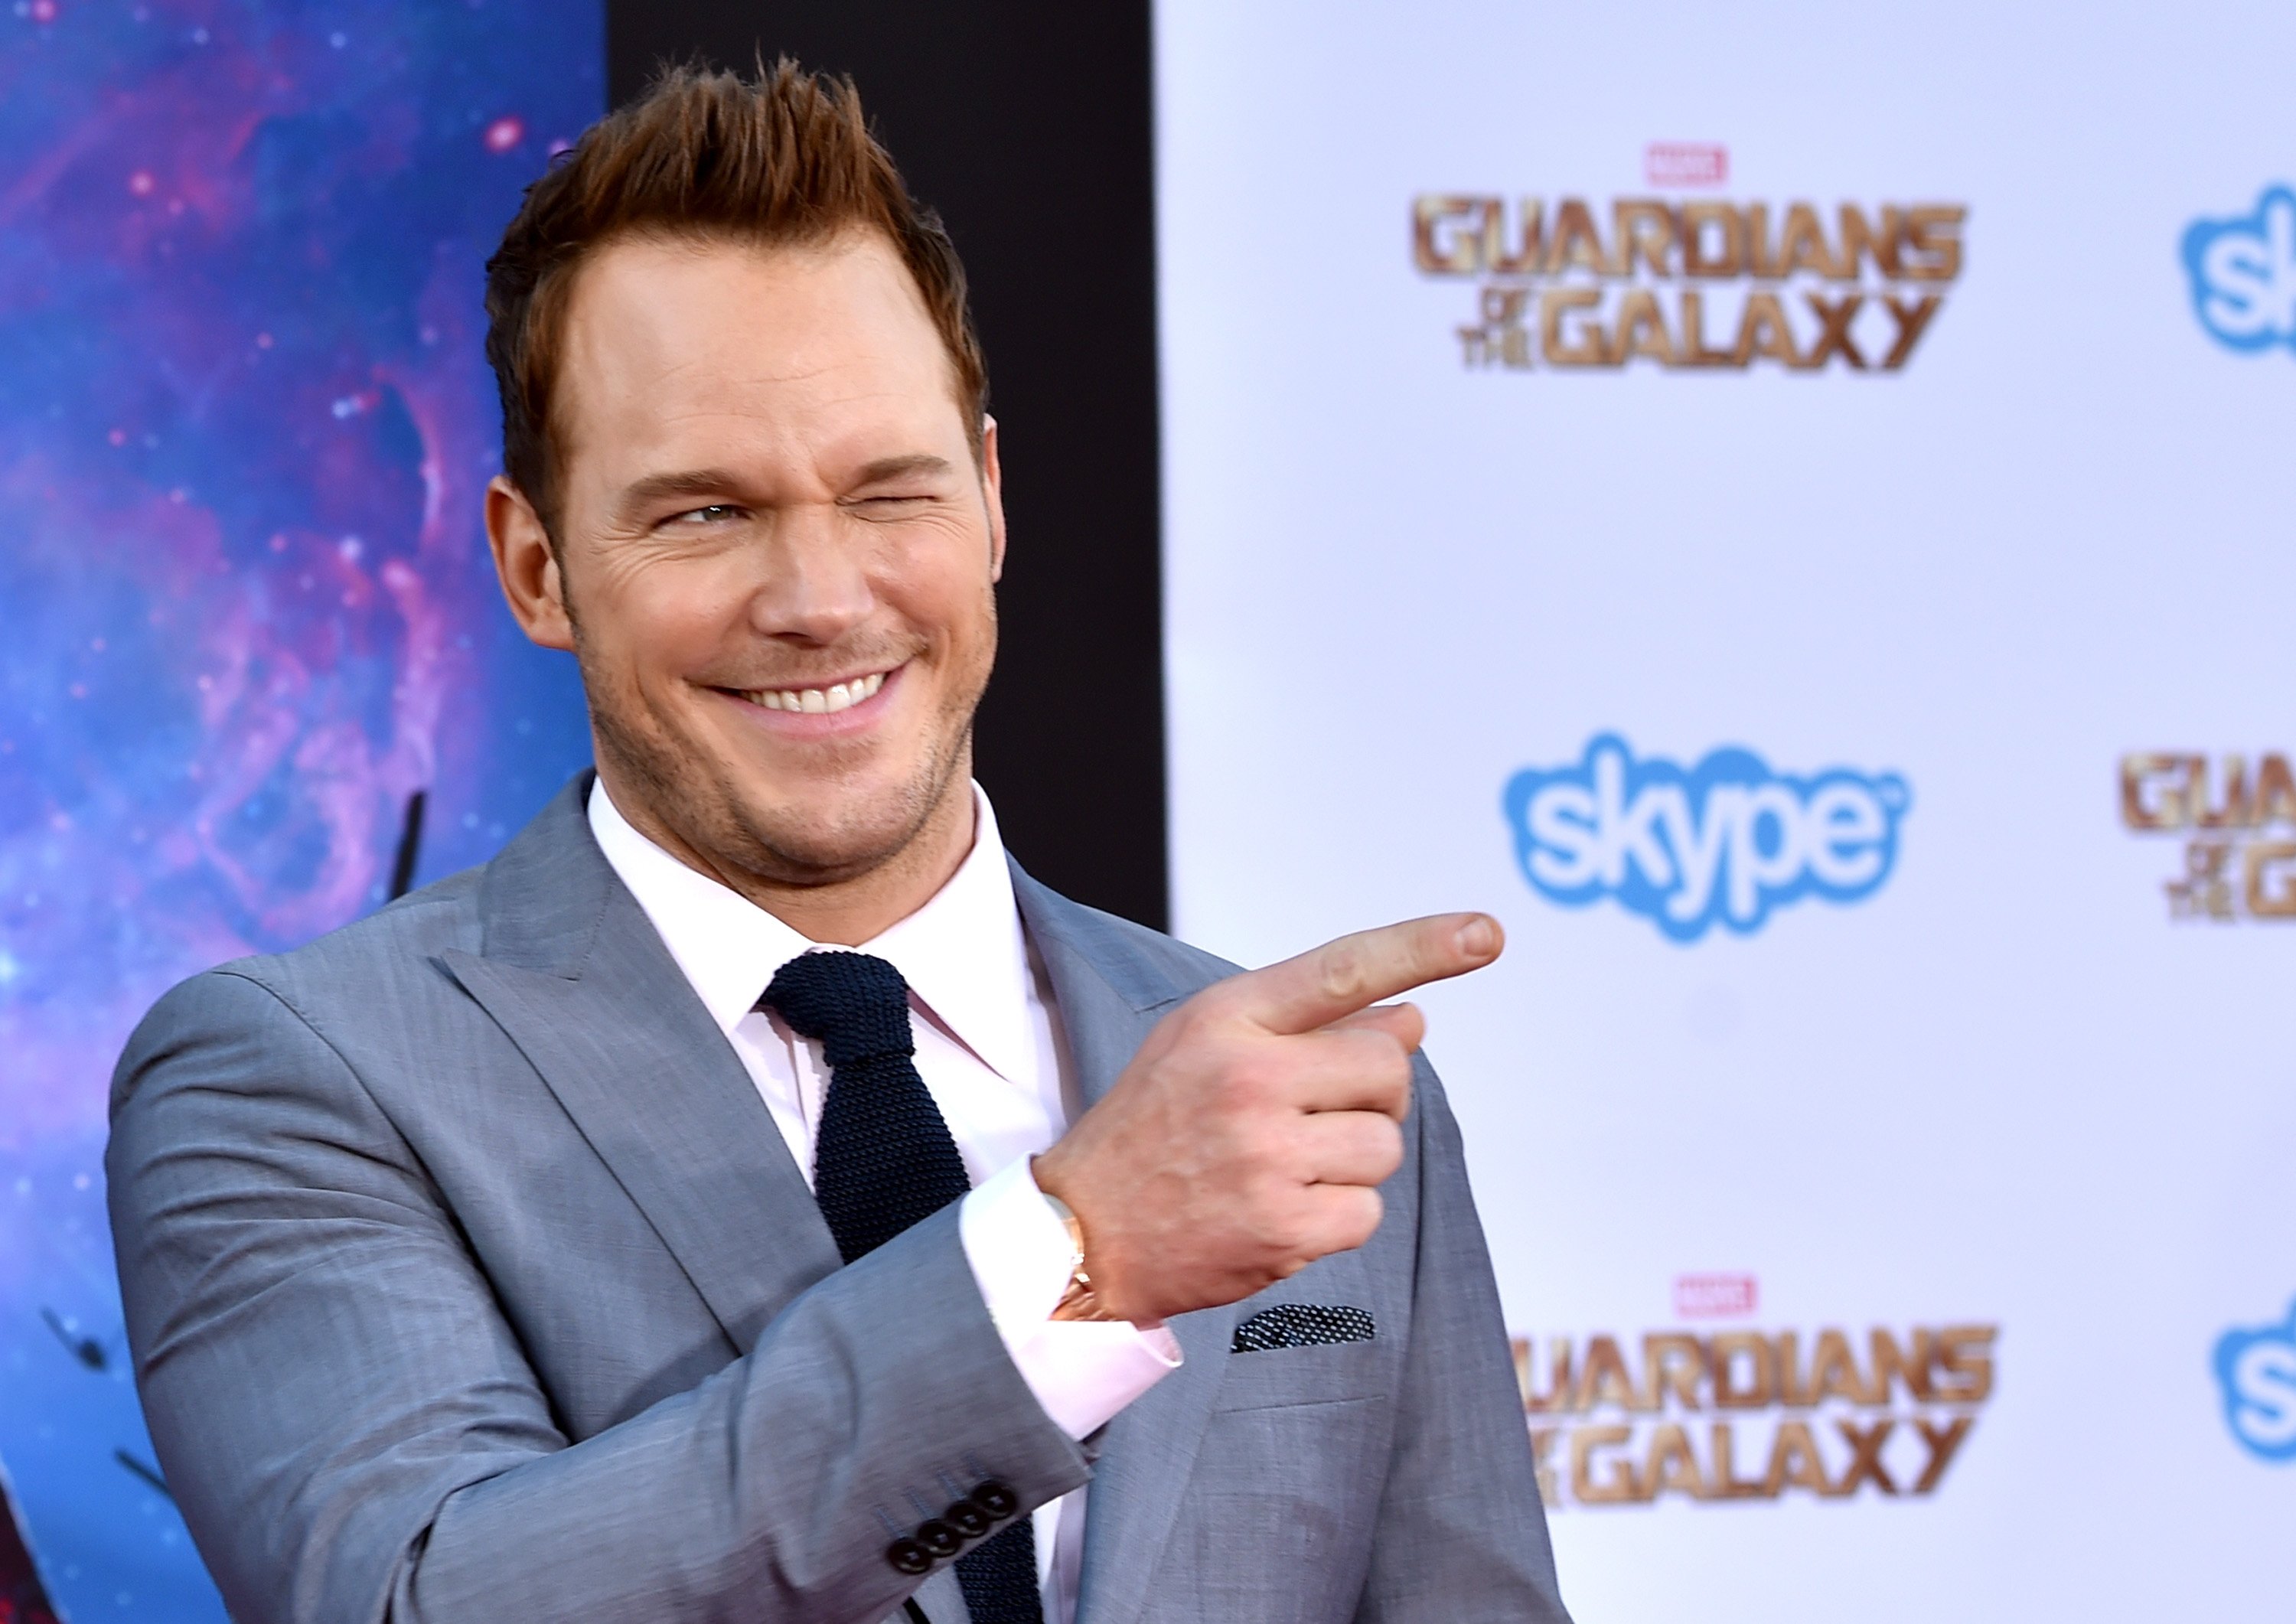 Peter Quill actor Chris Pratt smiling and pointing at the premiere of Marvel's 'Guardians of the Galaxy'